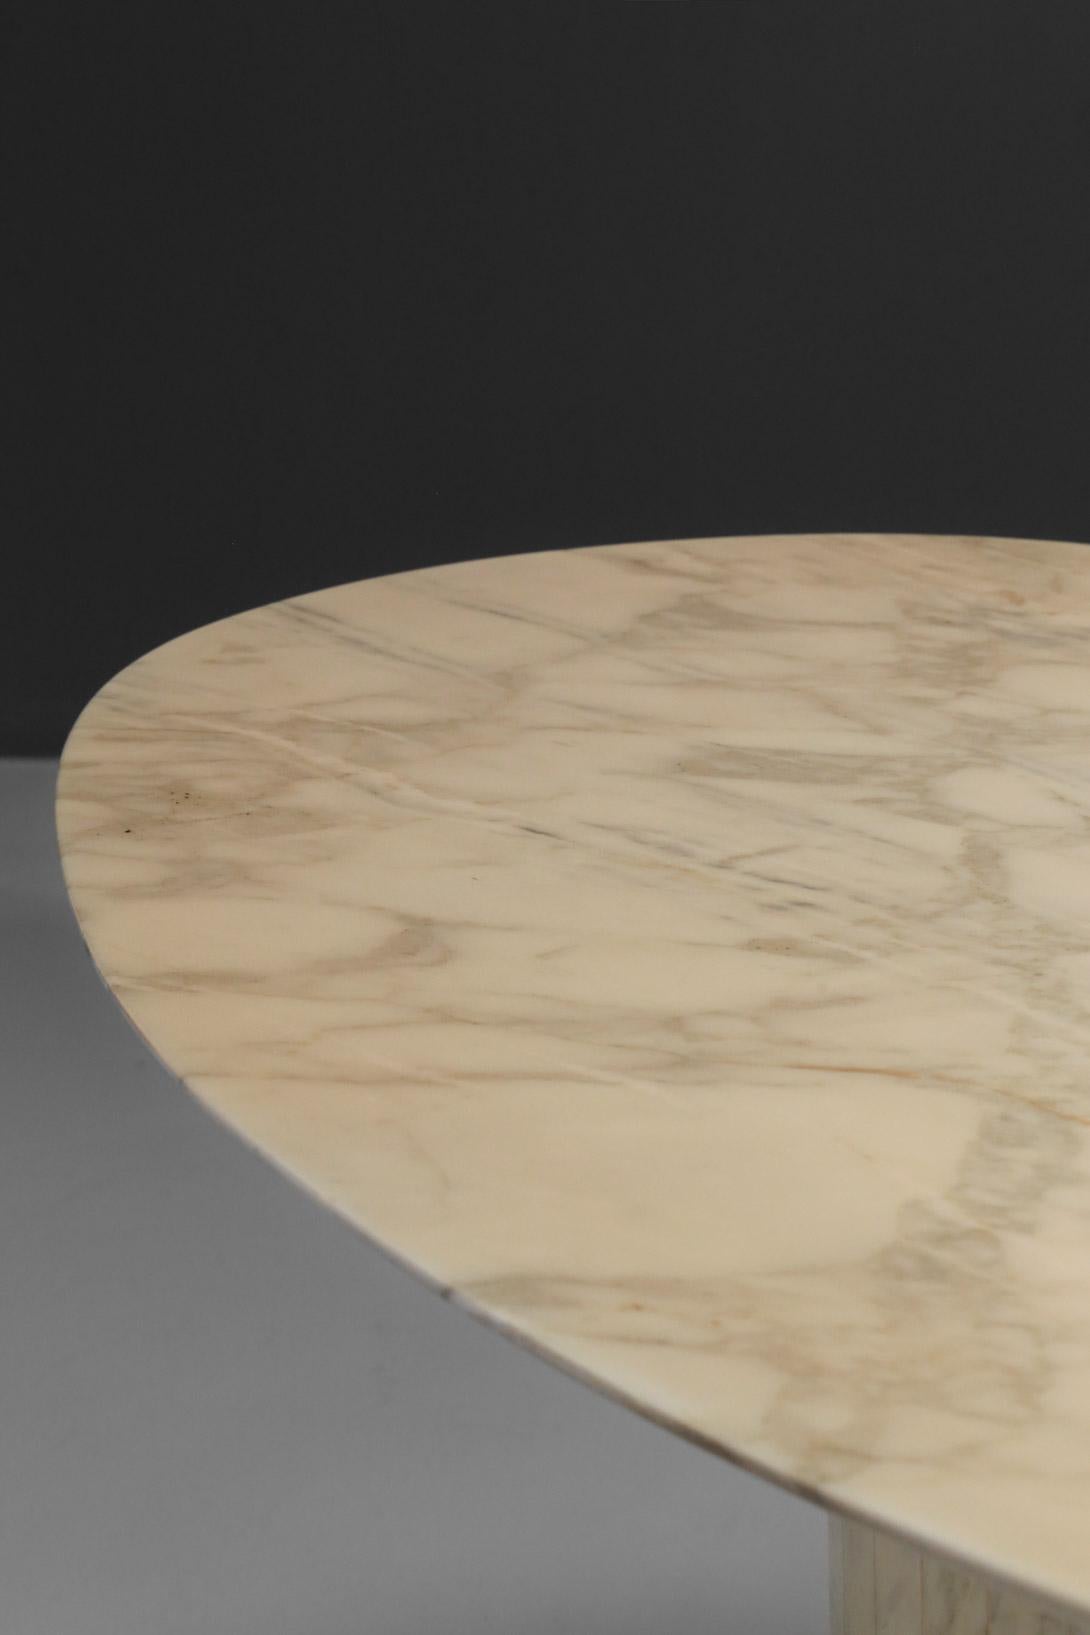 Modern Oval Dining Table in Carrara Marble from the 1970s French Design